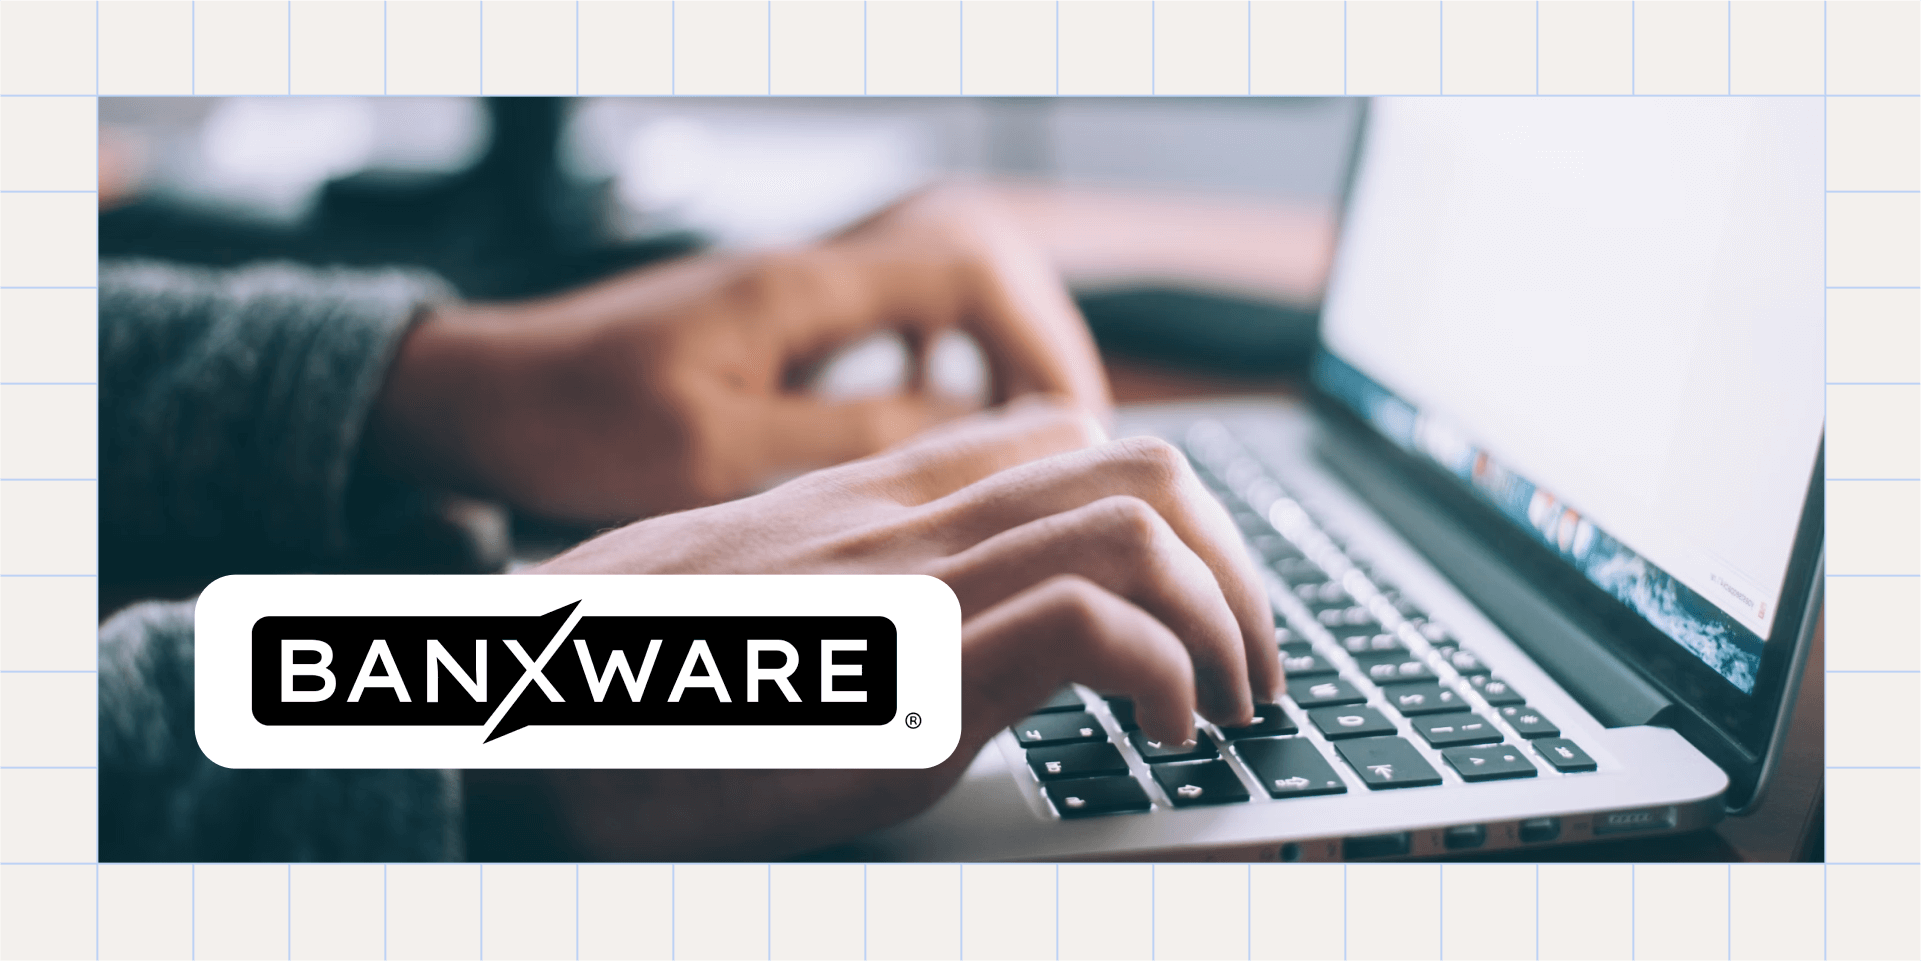 Banxware saves €140,000 per year on data engineering with Fivetran